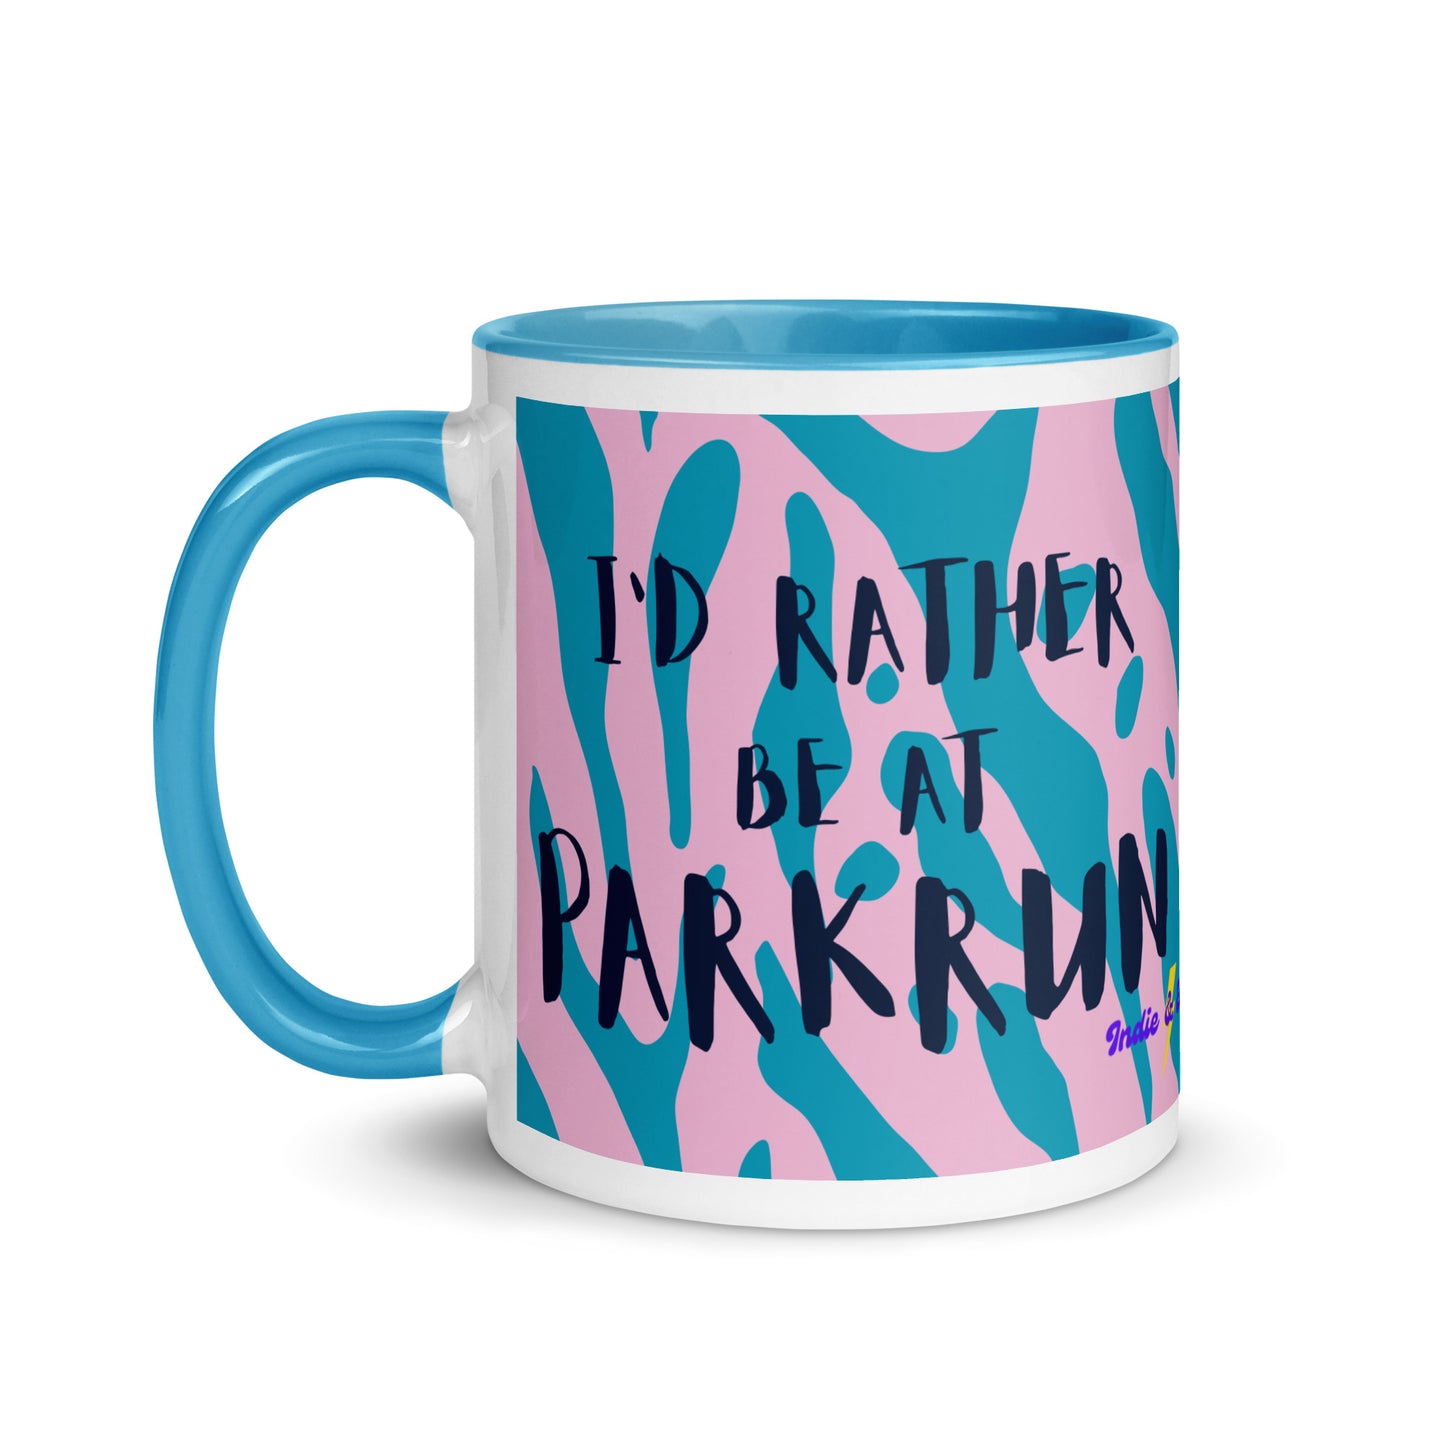 blue handled mug with a pink and blue animal print design and the phrase I'd rather be at parkrun in a black font. the perfect gift for a runner